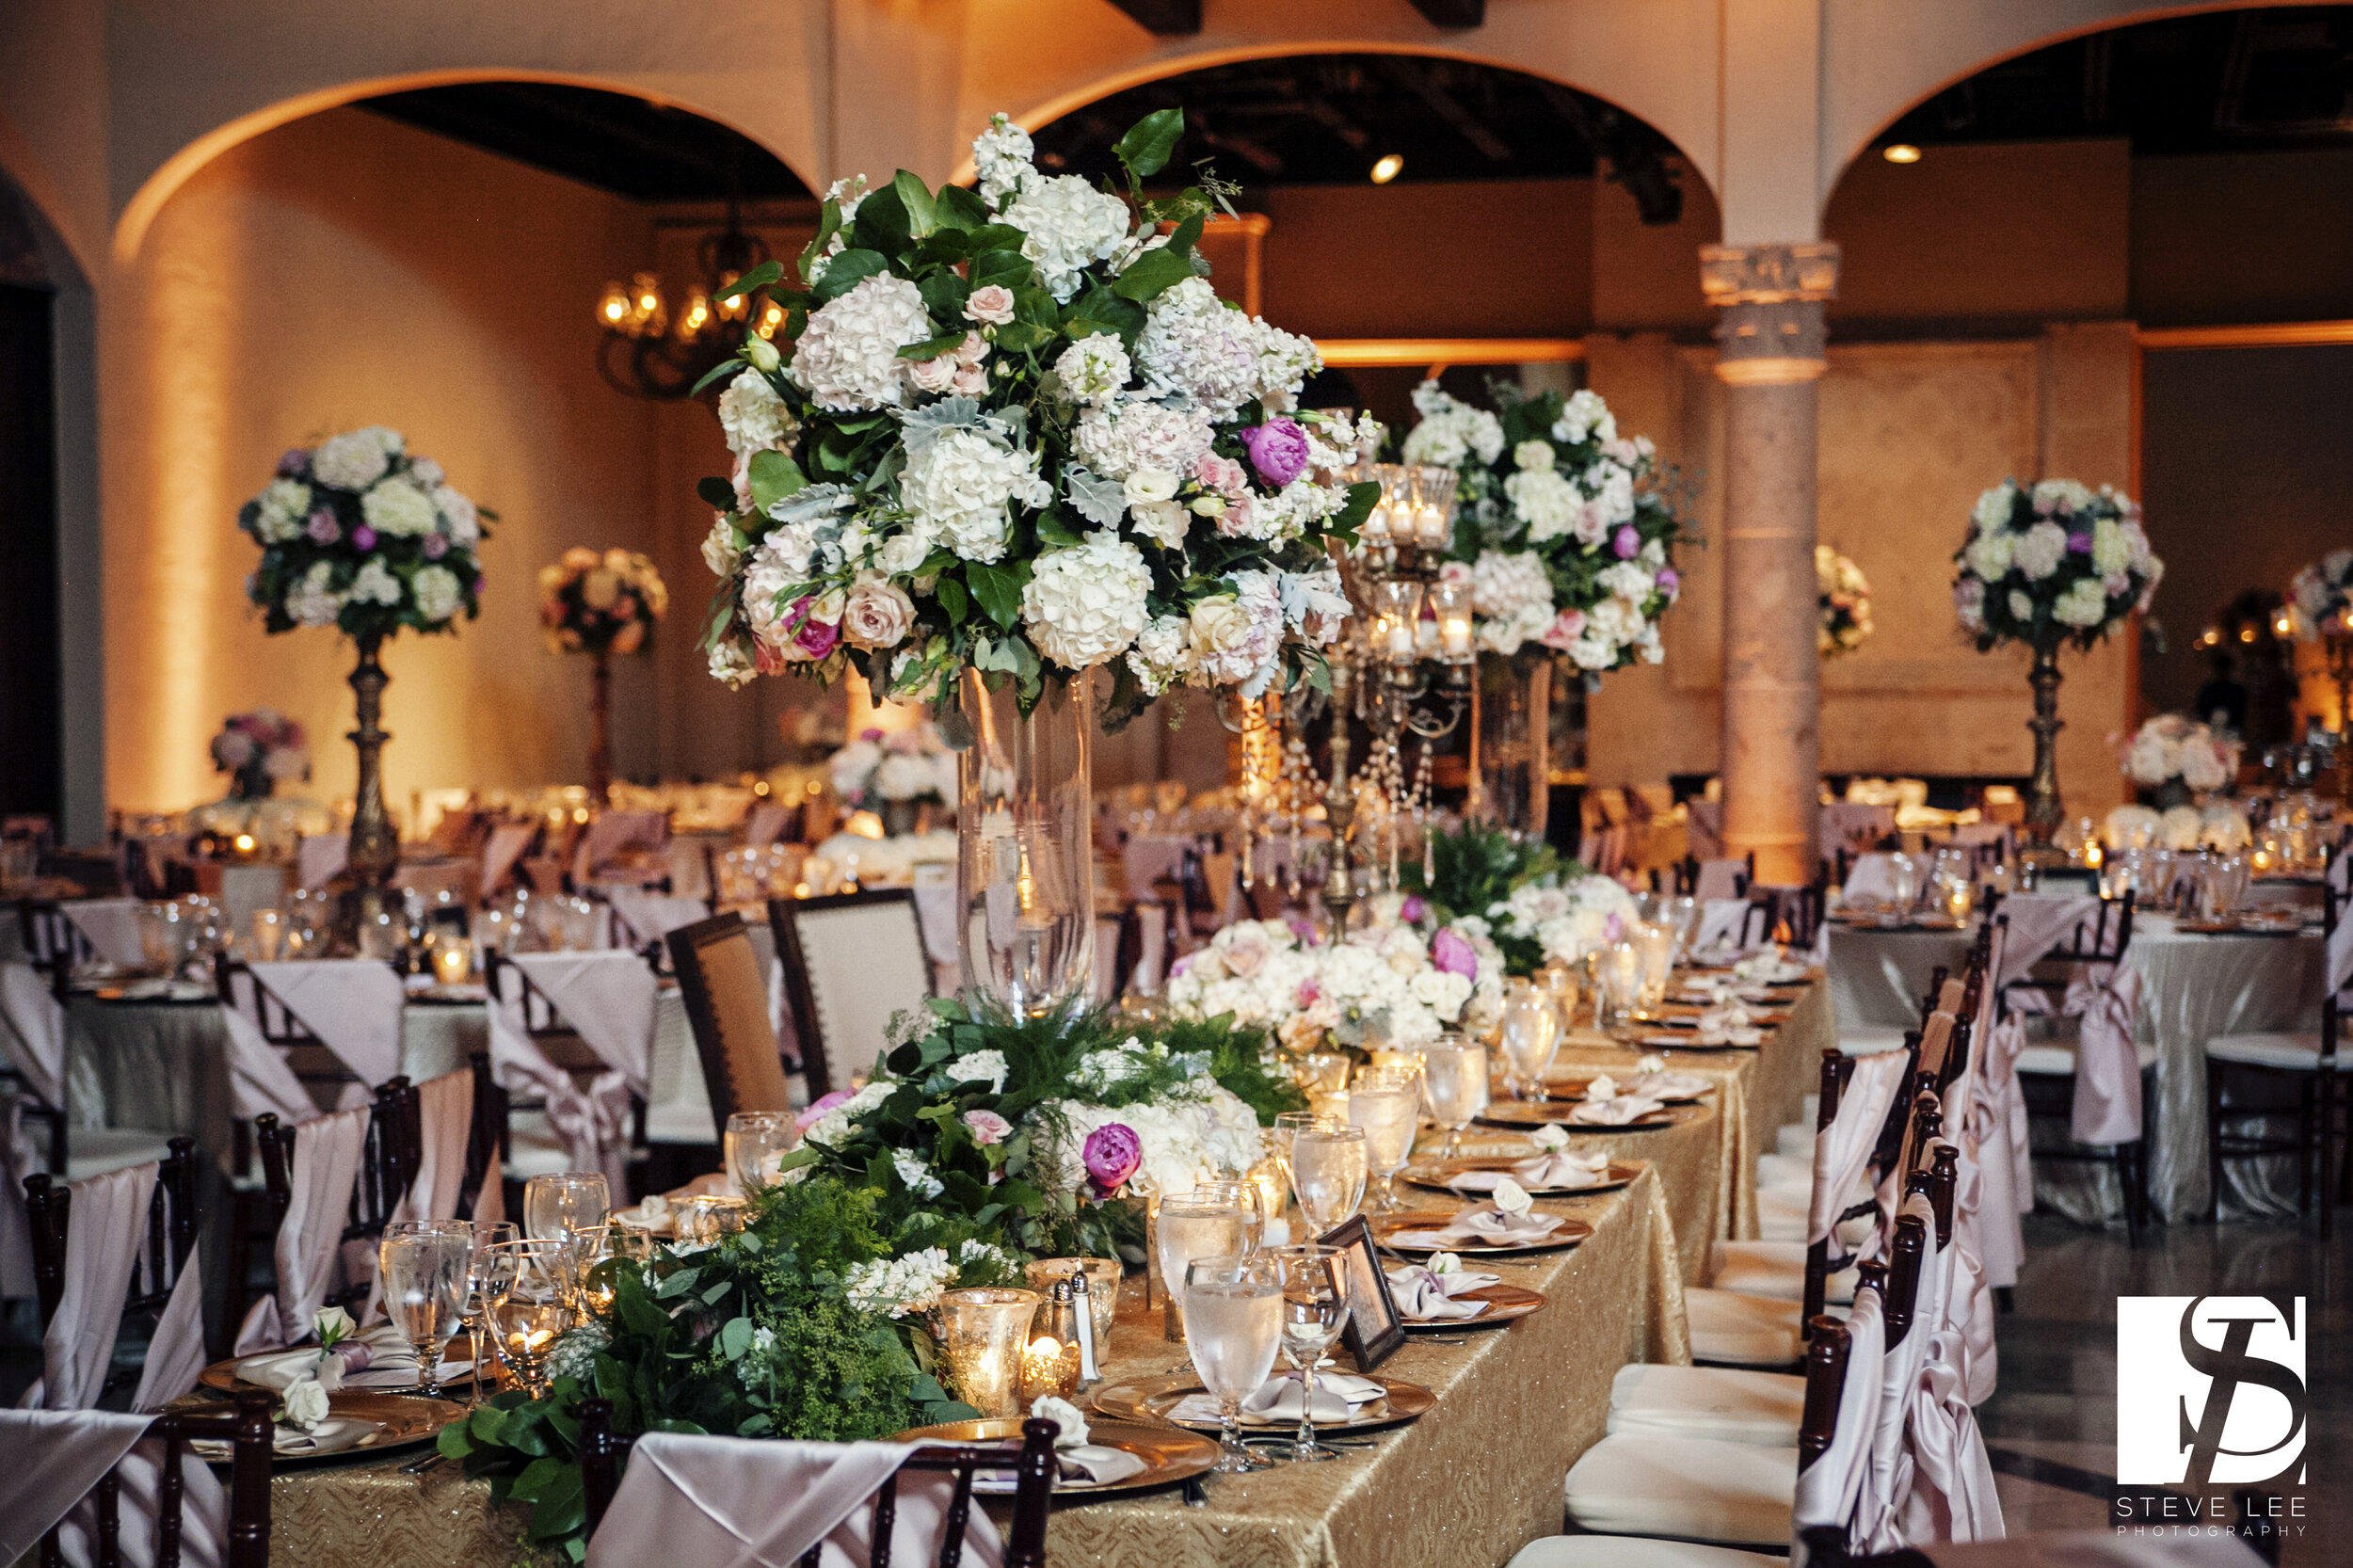 Birthday parties and corporate events of all kinds are hosted in this wedding and corporate event venues ballrooms. One of the leading wedding venues in Houston.